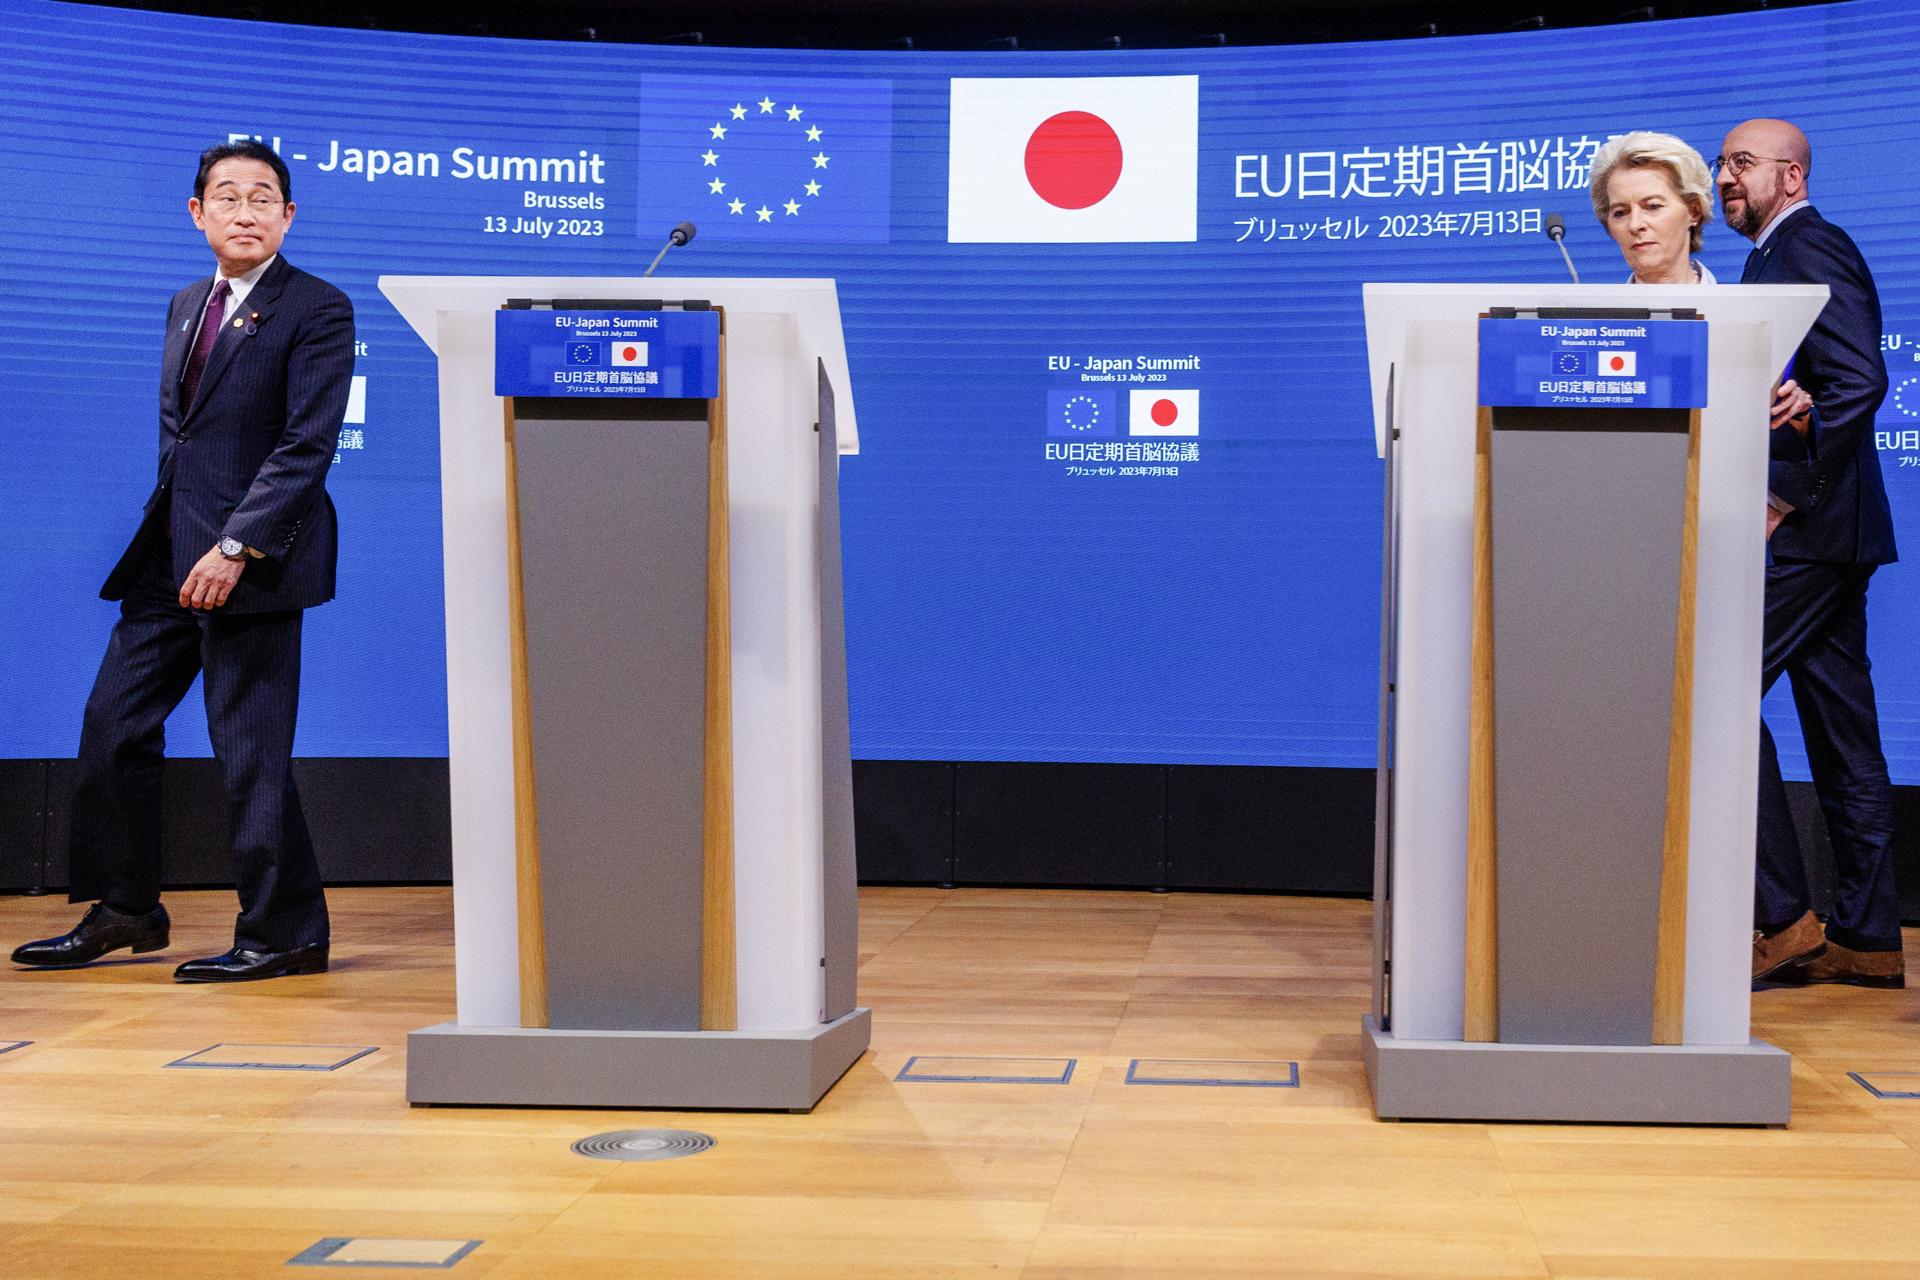 Brussels (Belgium), 13/07/2023.- (L-R) Japan's Prime Minister Fumio Kishida, European Commission President Ursula von der Leyen and European Council President Charles Michel arrive at a press conference after the 29th EU-Japan summit in Brussels, Belgium, 13 July 2023. Japan is EU's closest partner in the Indo-Pacific region. The summit highlights this strong relationship as leaders take stock of progress on several partnerships and lay the ground for deeper cooperation. (Bélgica, Japón, Bruselas) EFE/EPA/OLIVIER MATTHYS